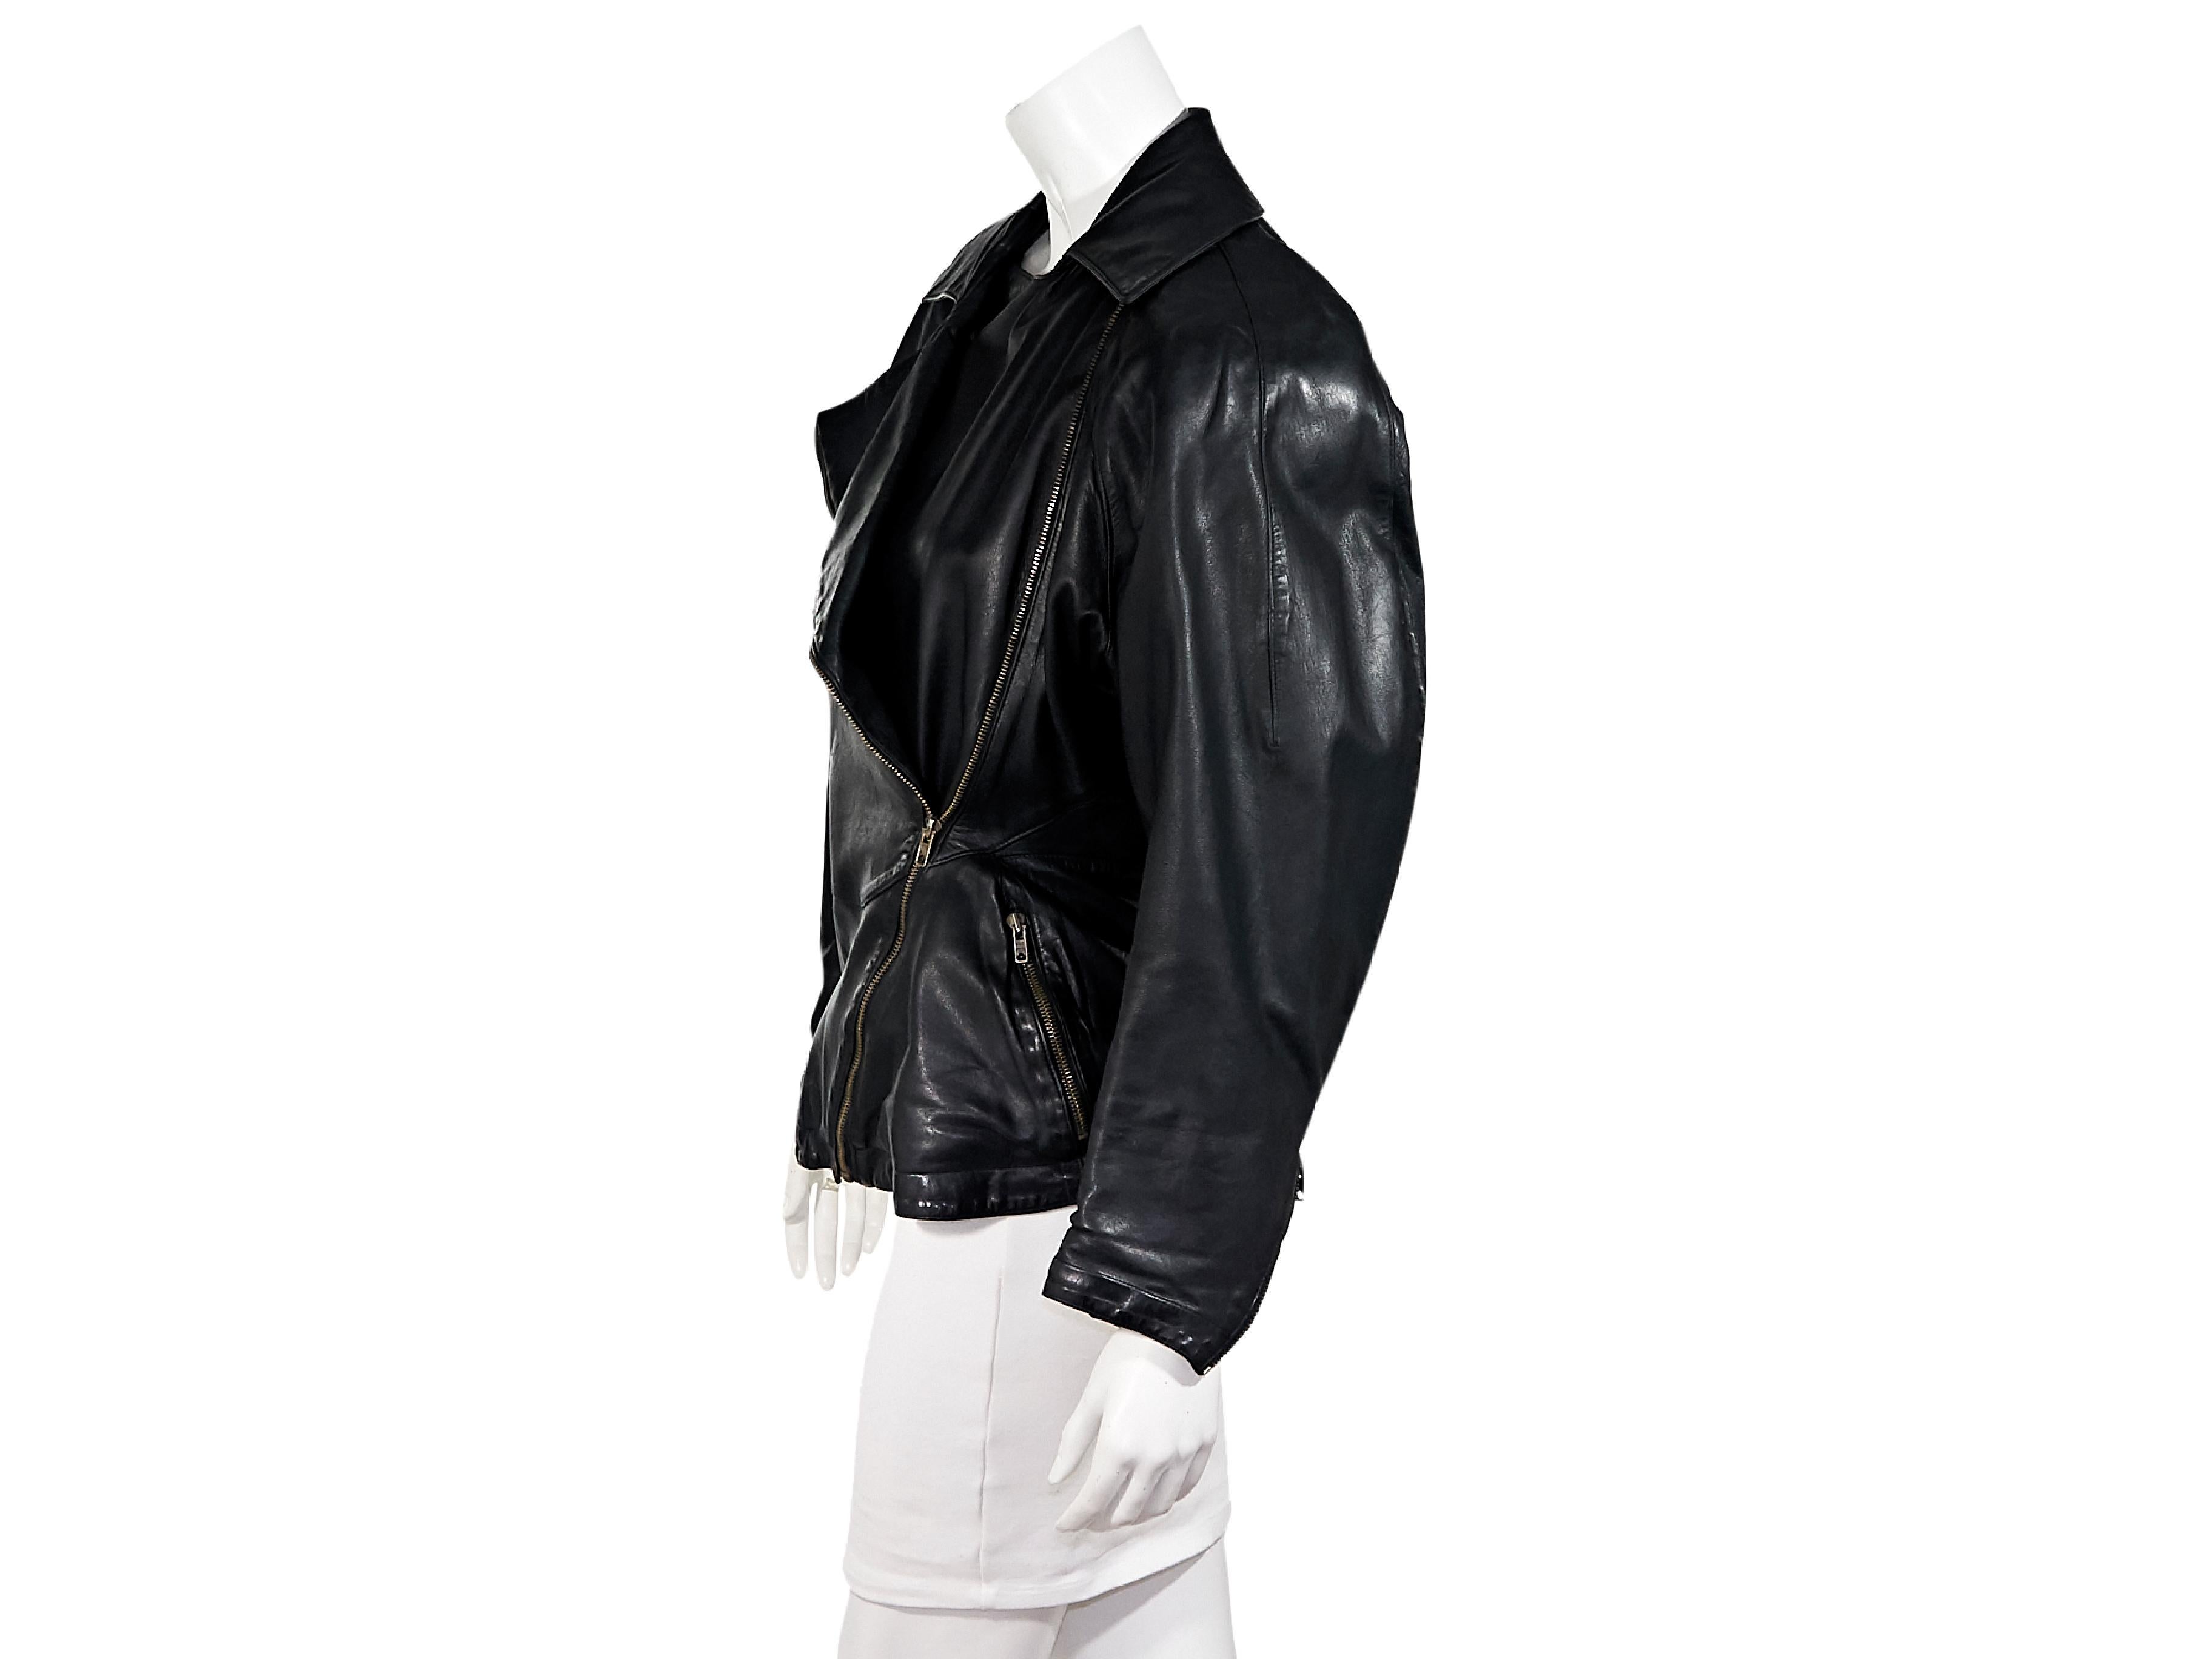 Product details:  Vintage black leather jacket by Alaia.  Circa the 1980s.  Long dolman sleeves.  Zip cuffs.  Asymmetrical zip-front closure.  Chest and waist zip-front pockets.  Goldtone hardware.  40